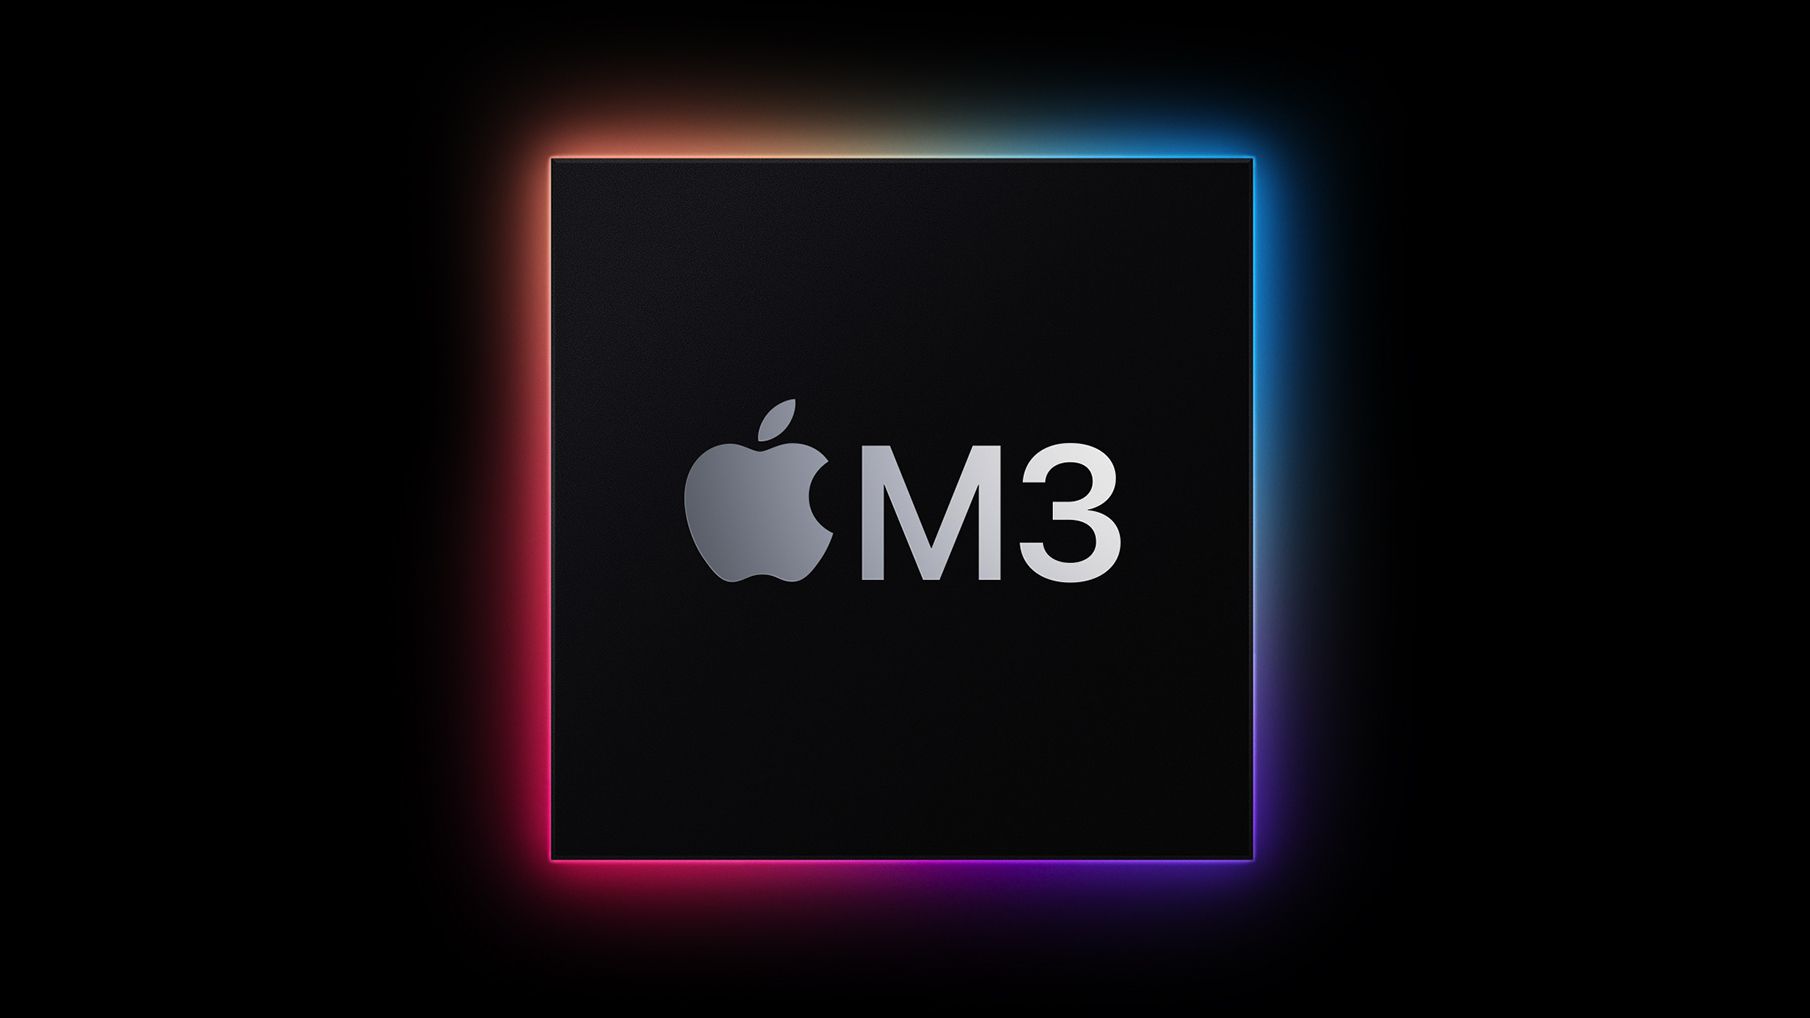 Apple M3 chip: all the news, announcements, and rumours so far